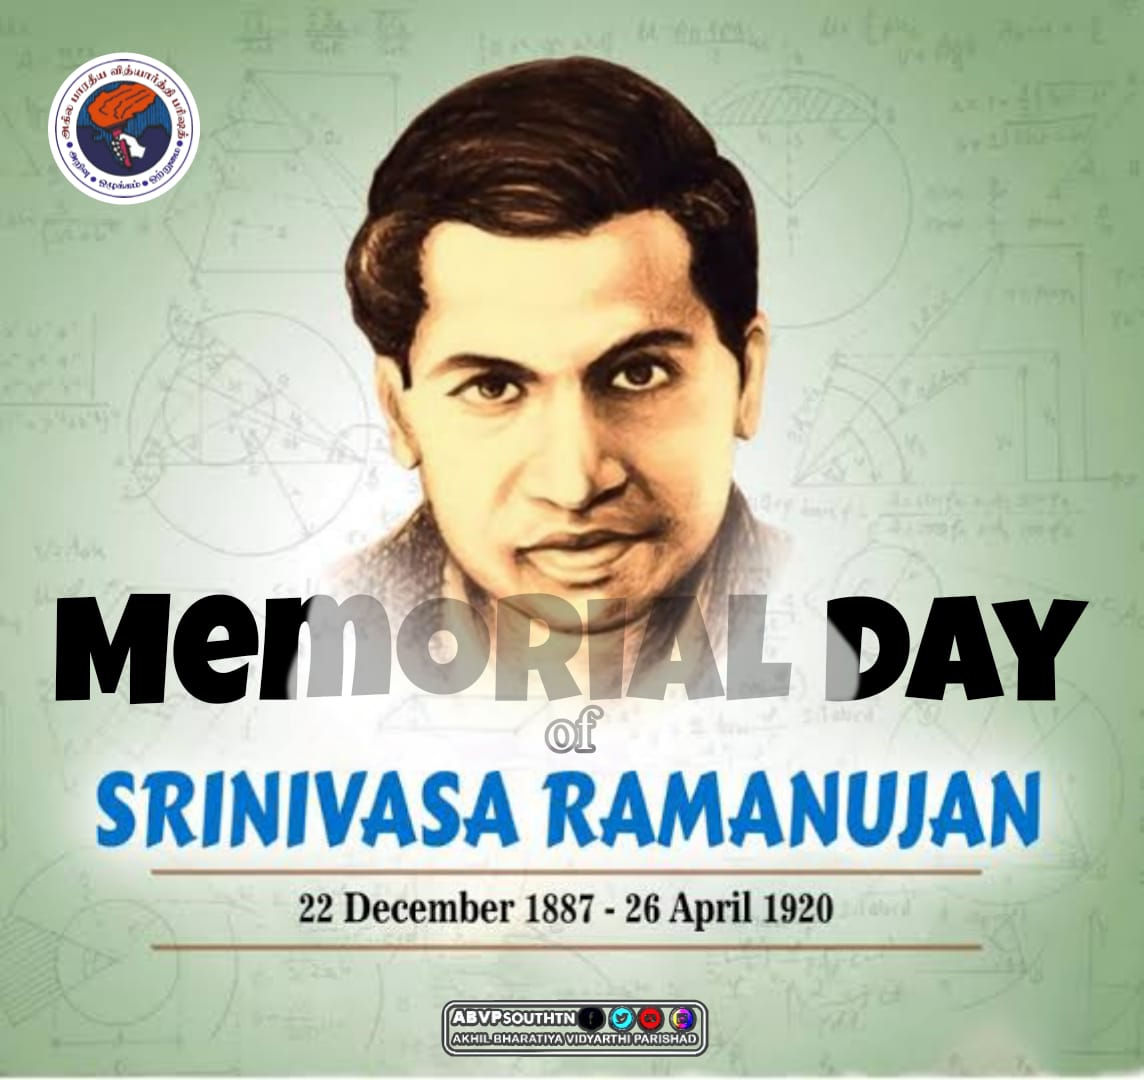 ABVP Remembering the greatest Indian Mathematician #SrinivasaRamanujan on his death anniversary (22 Dec 1887 – 26 Apr 1920)